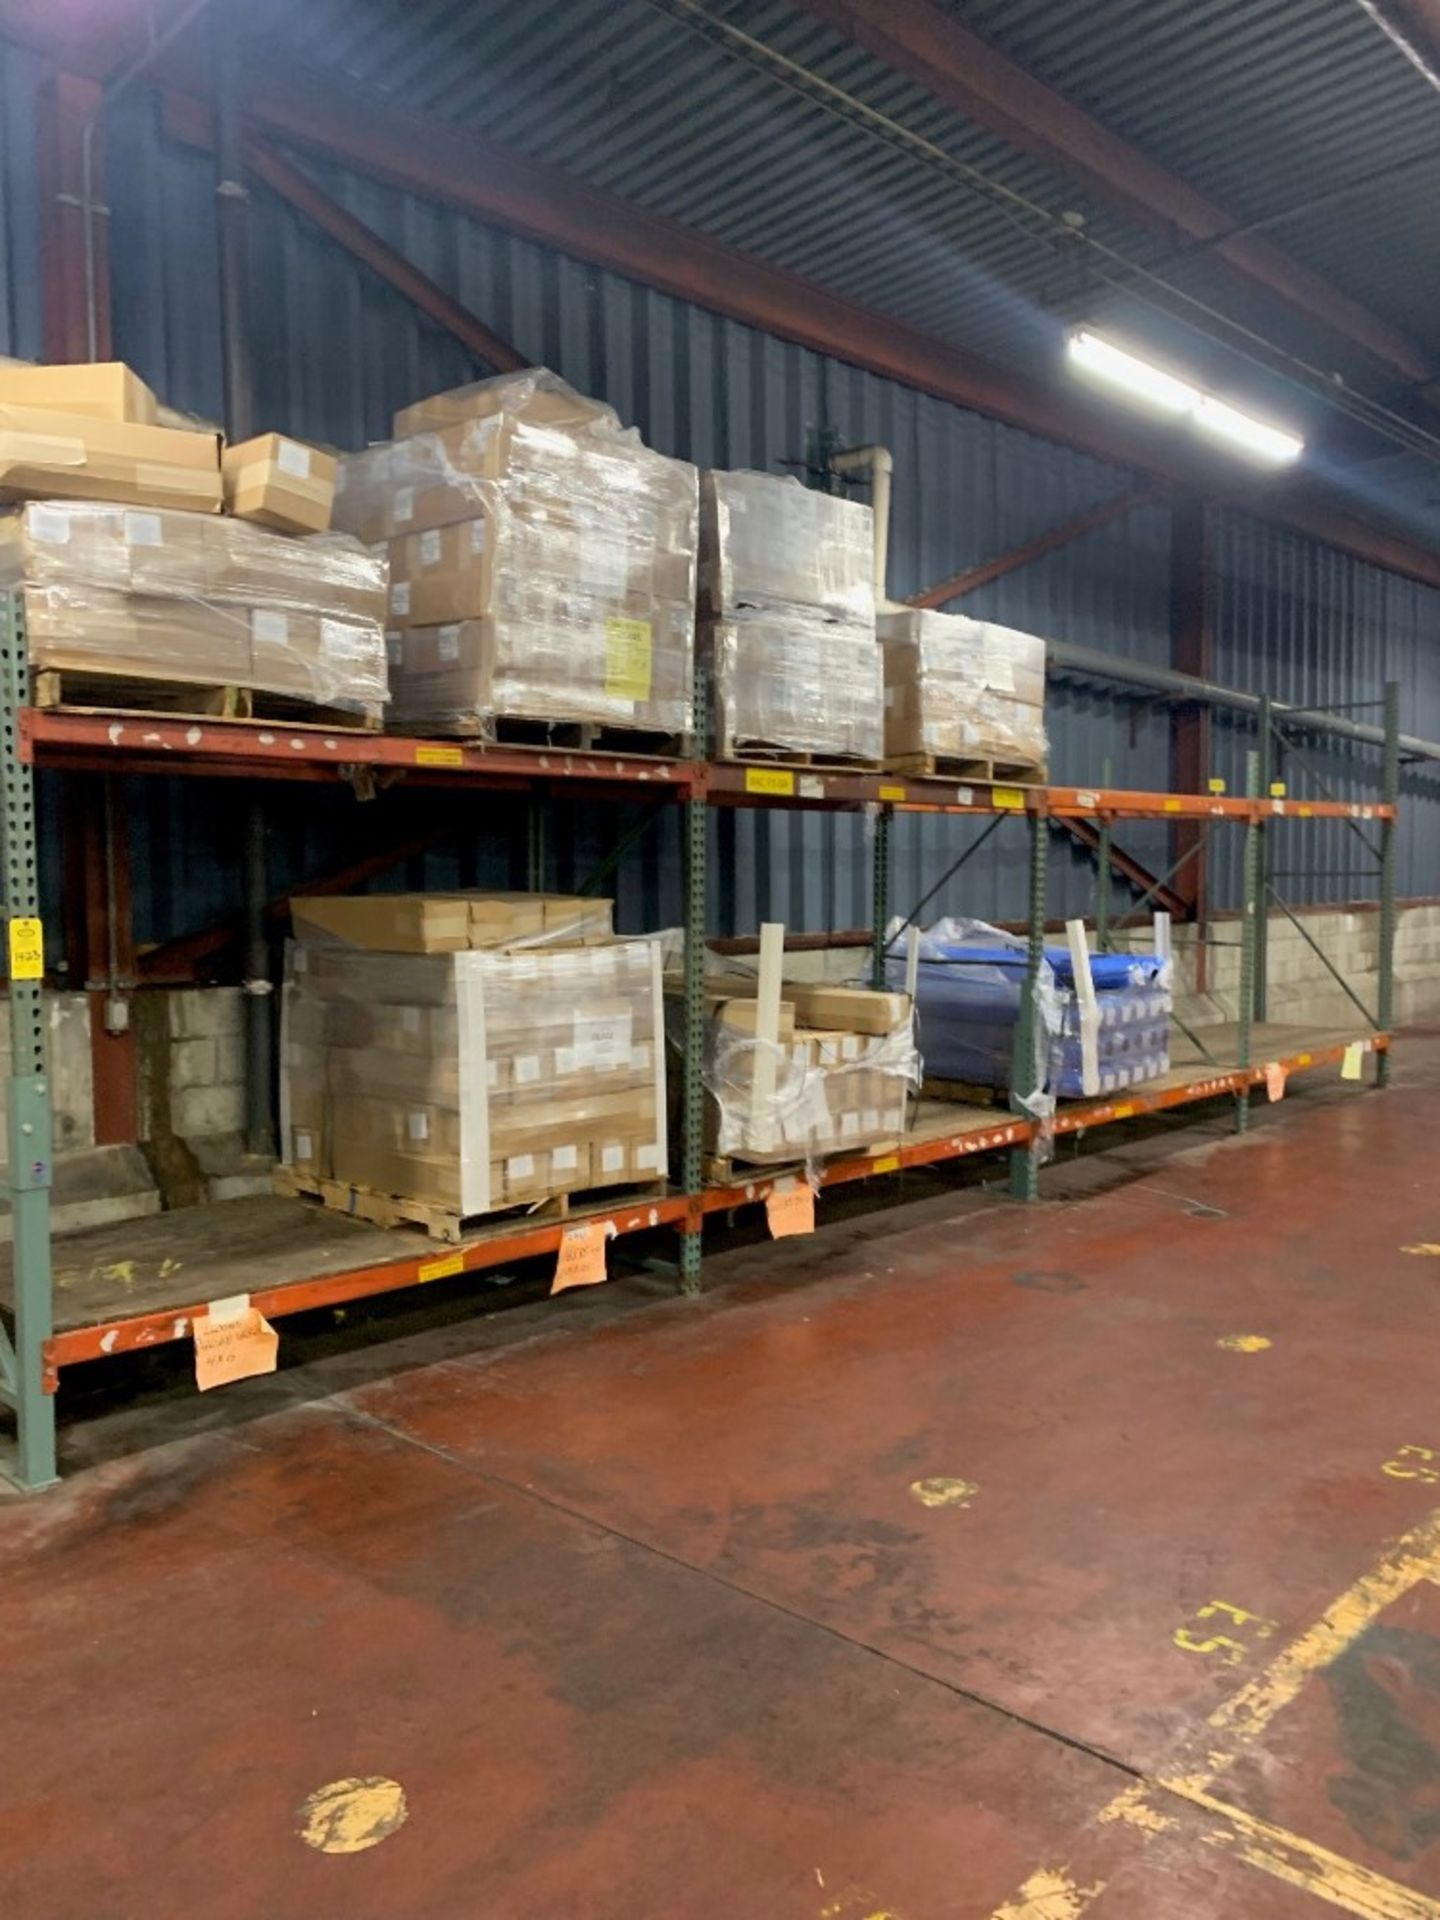 Lot (15) Sections Pallet Racking does not include contents: Required Loading Fee $400.00, Rigger- - Image 3 of 3